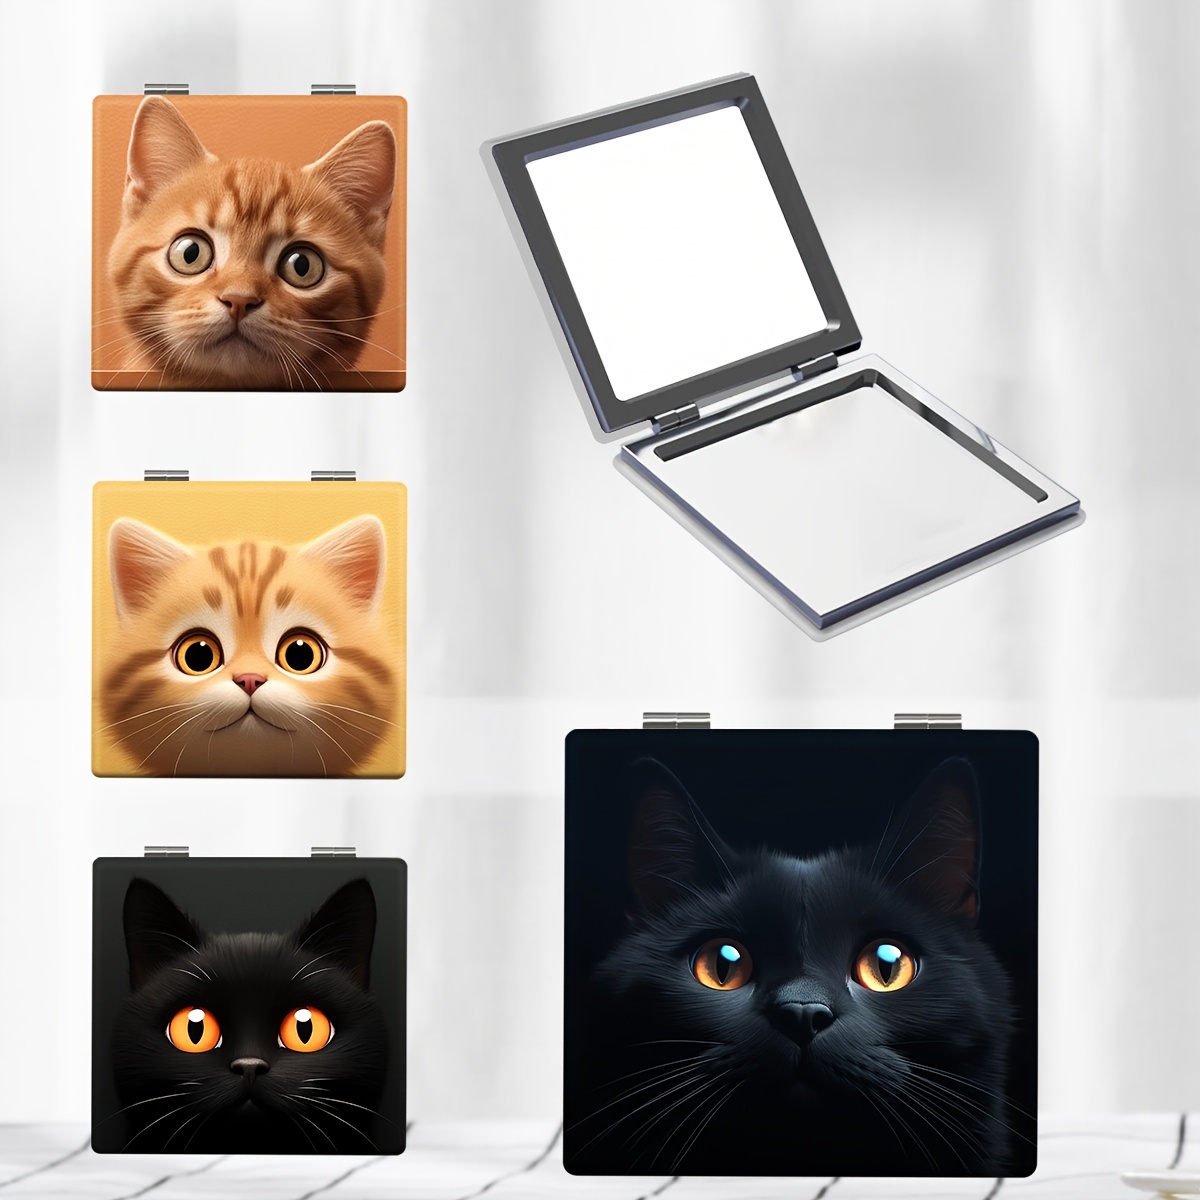 

1pc Portable Pocket Makeup Mirror, Foldable Hd Cute Cartoon Kitten Series Small Mirror, Outdoor Personal Care Supplies, Small Mirror Gift